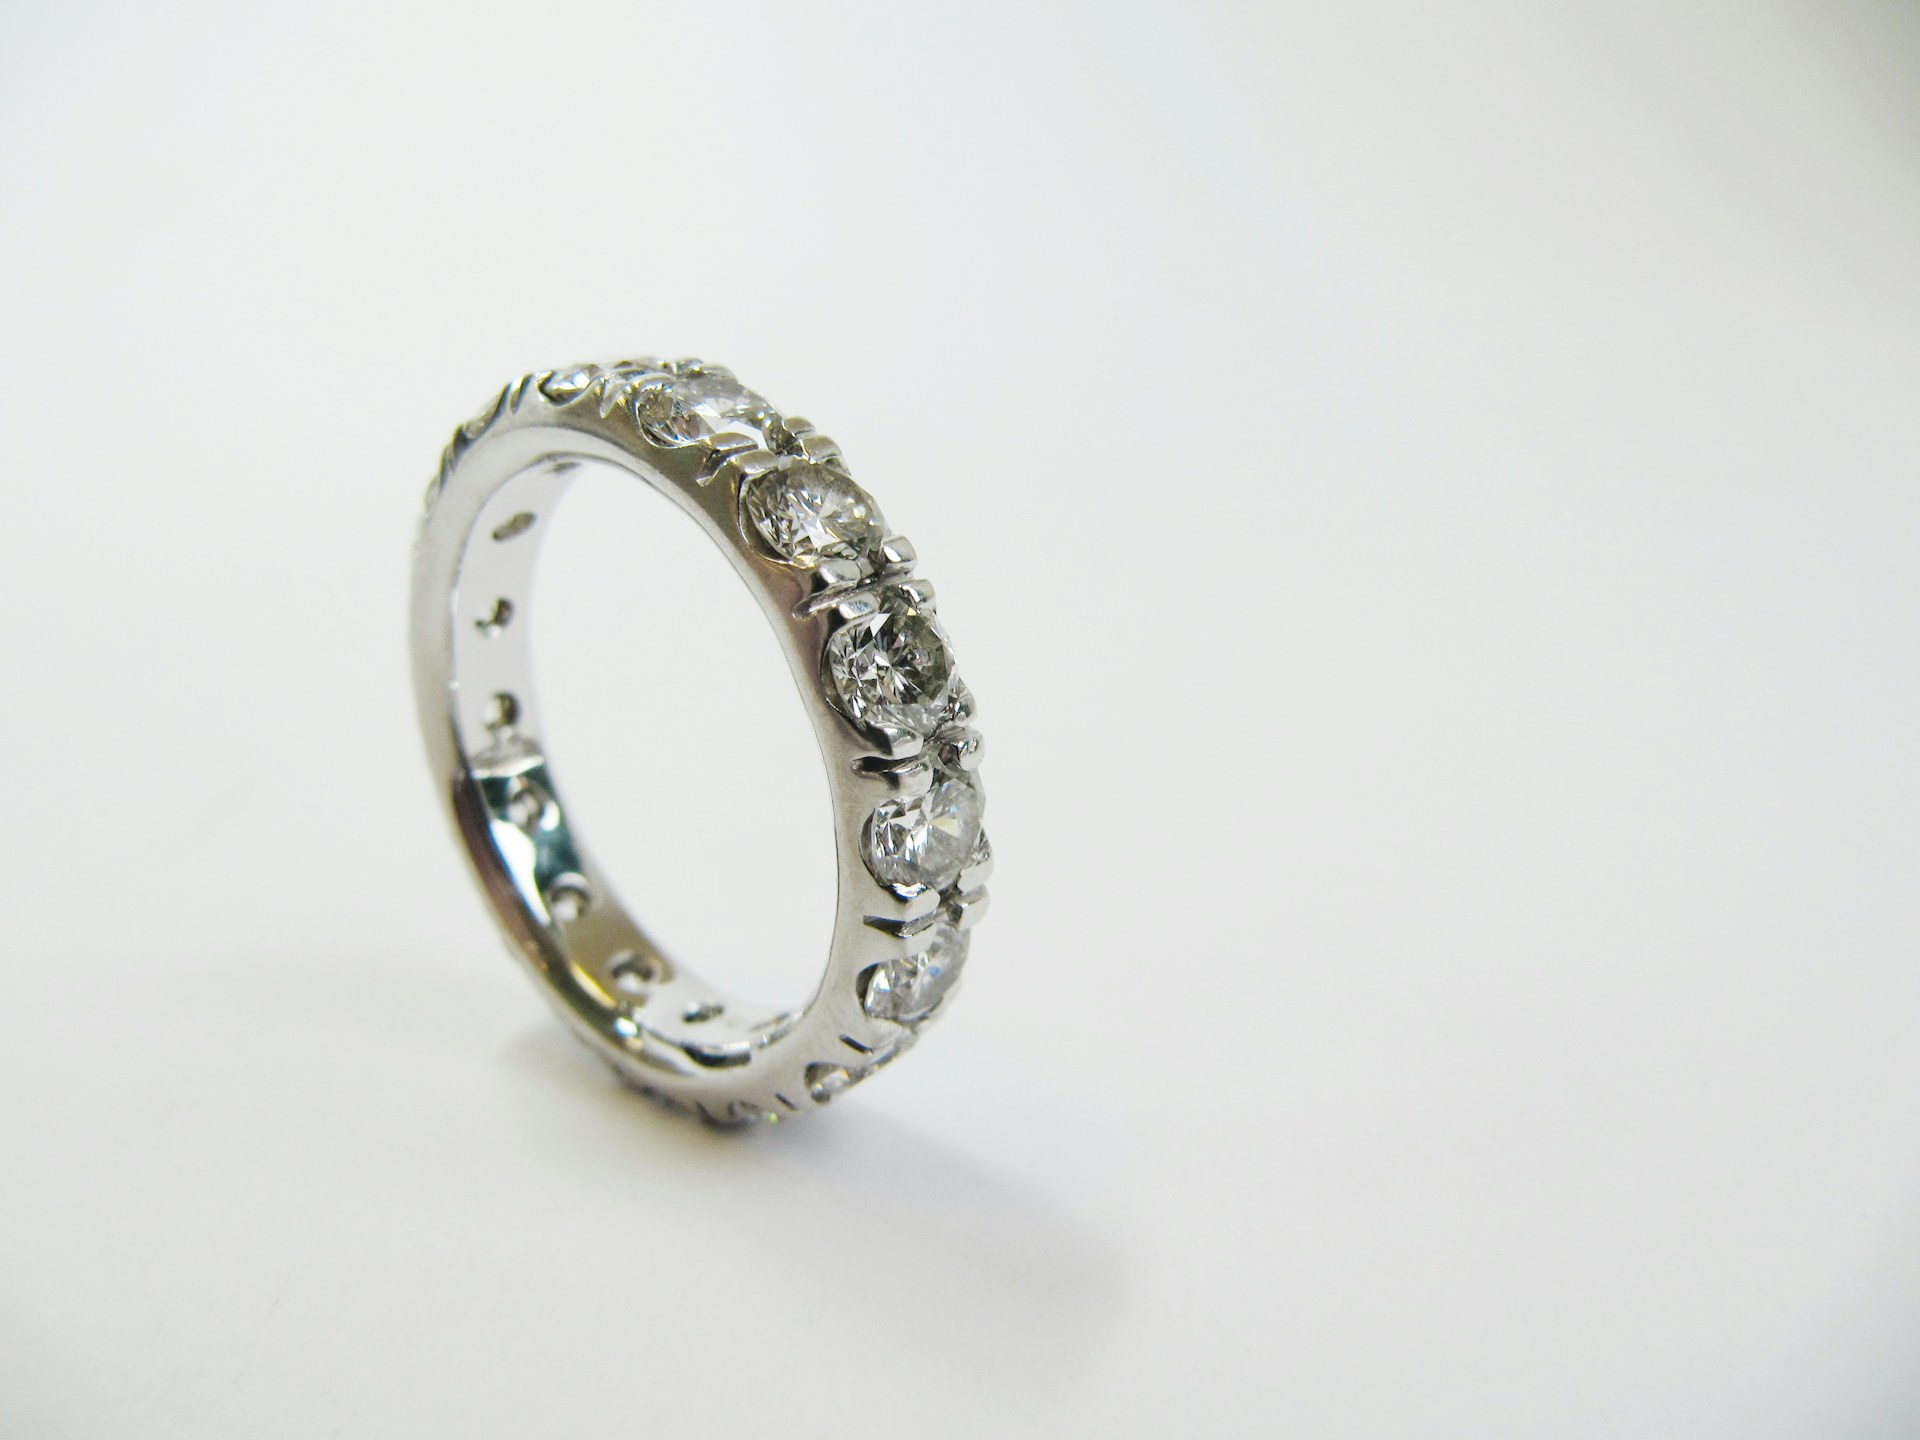 a white gold, prong set wedding band featuring round cut diamonds against a white background